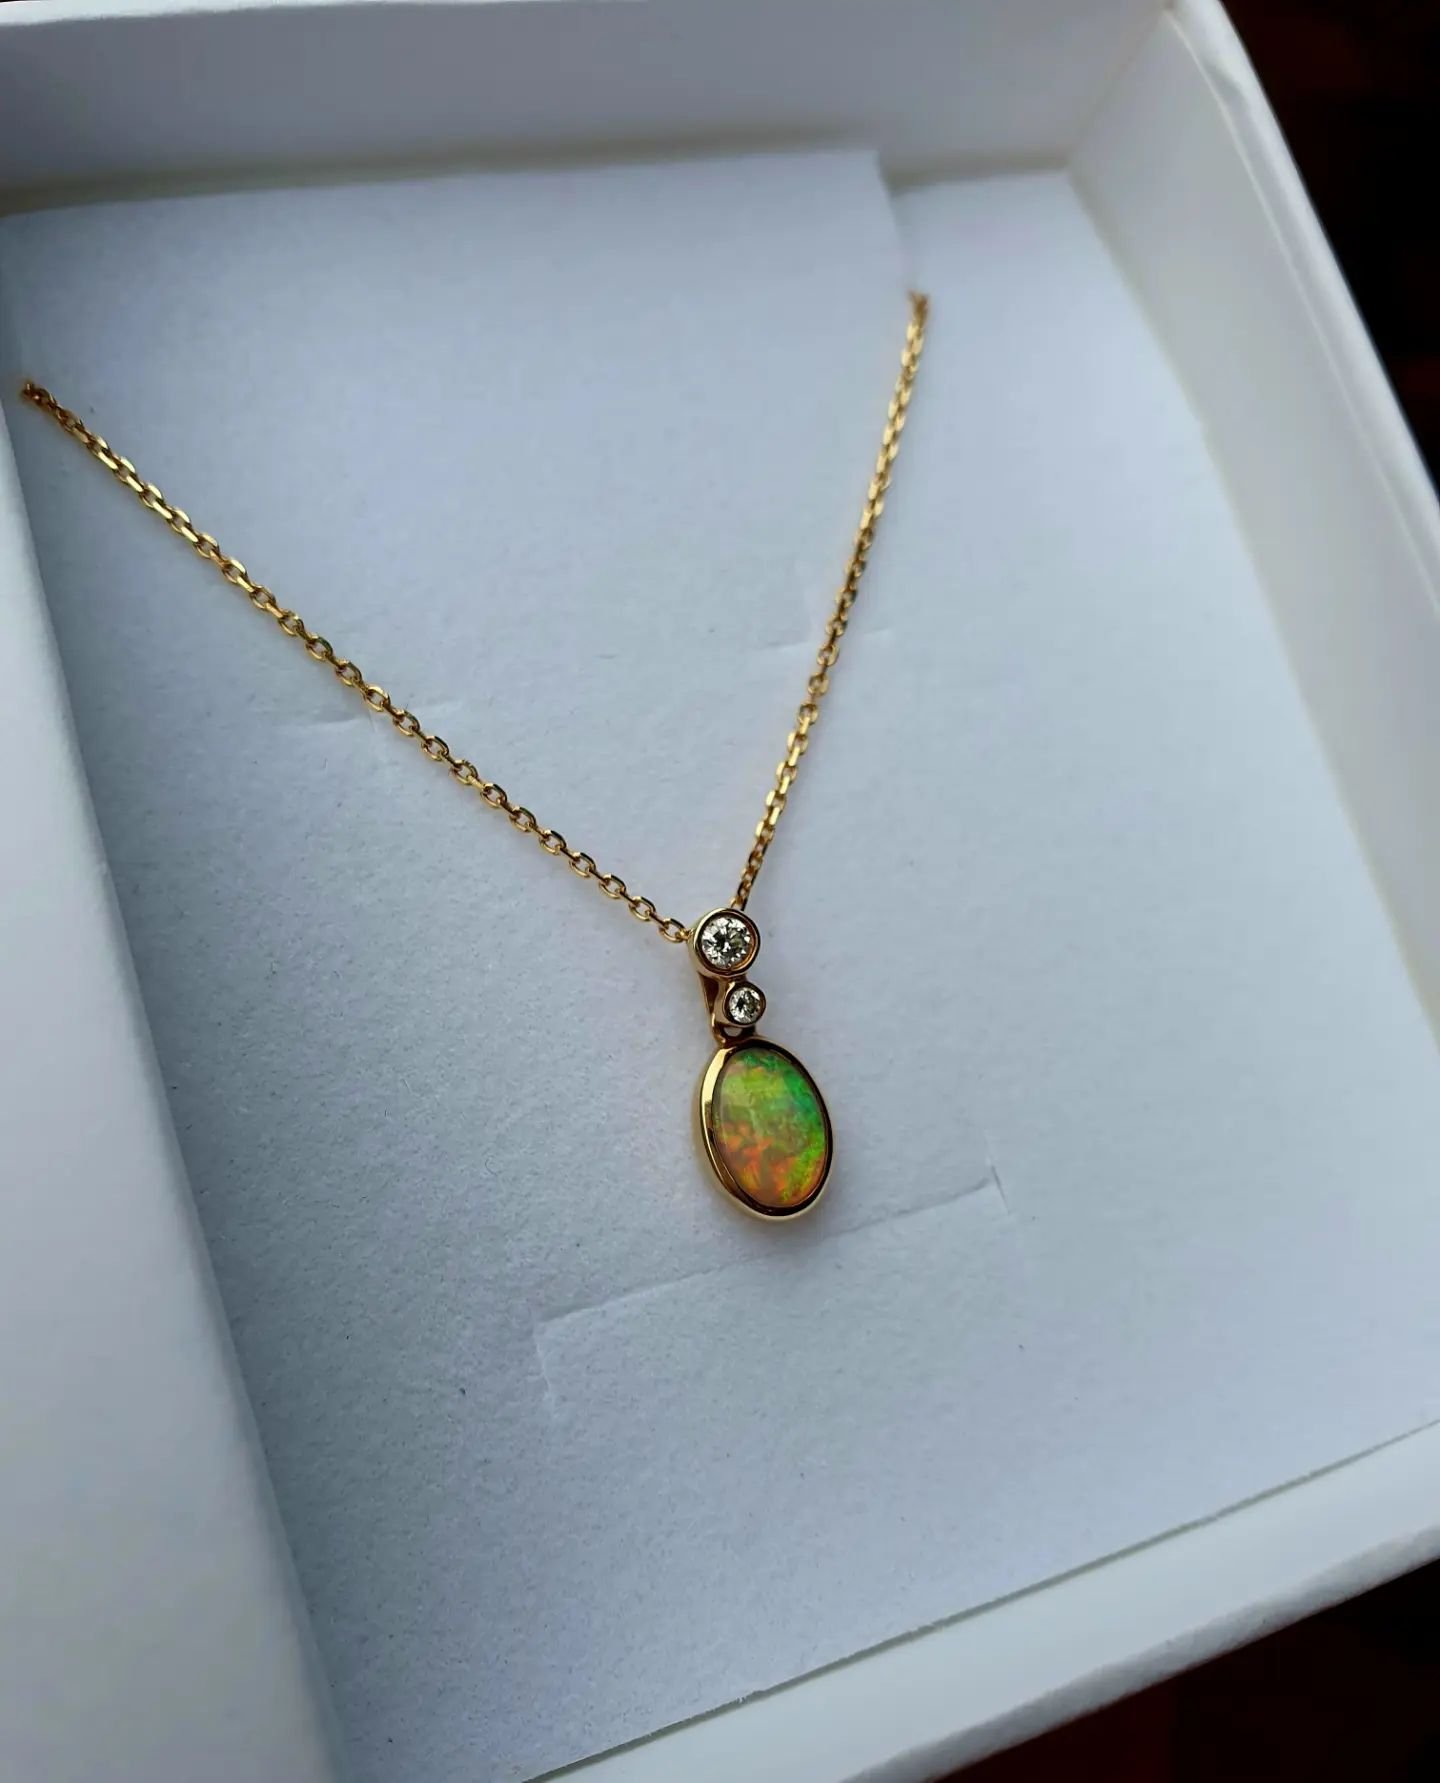 Solid gold, Australian solid opal (Lightning Ridge) and Diamond Pendant (includes chain) 

Was $2450 
Now $1900! 

Xx 🦄